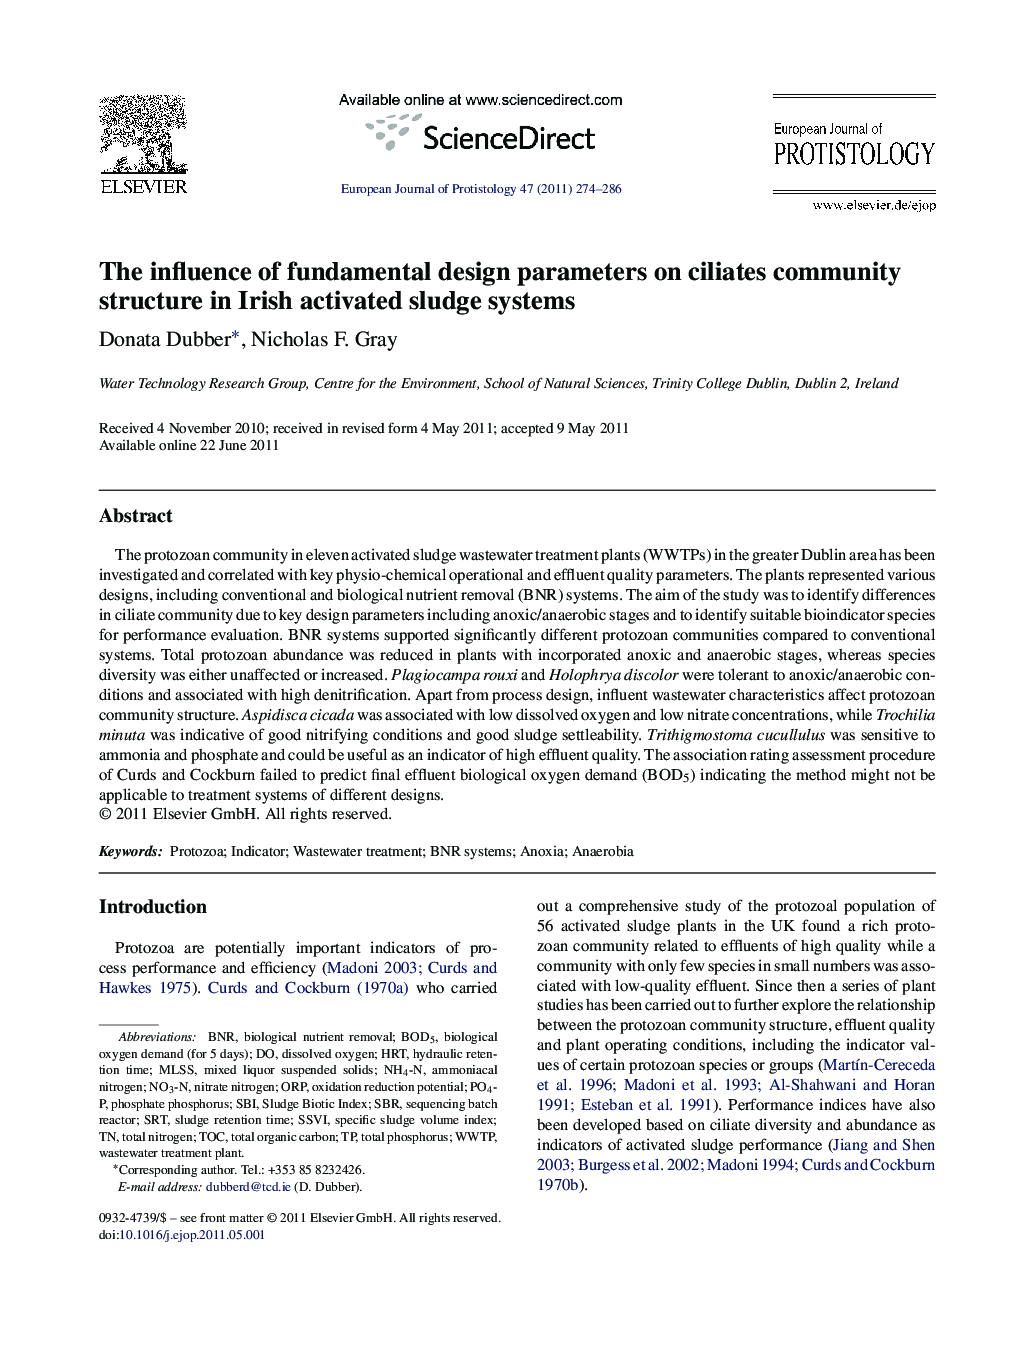 The influence of fundamental design parameters on ciliates community structure in Irish activated sludge systems